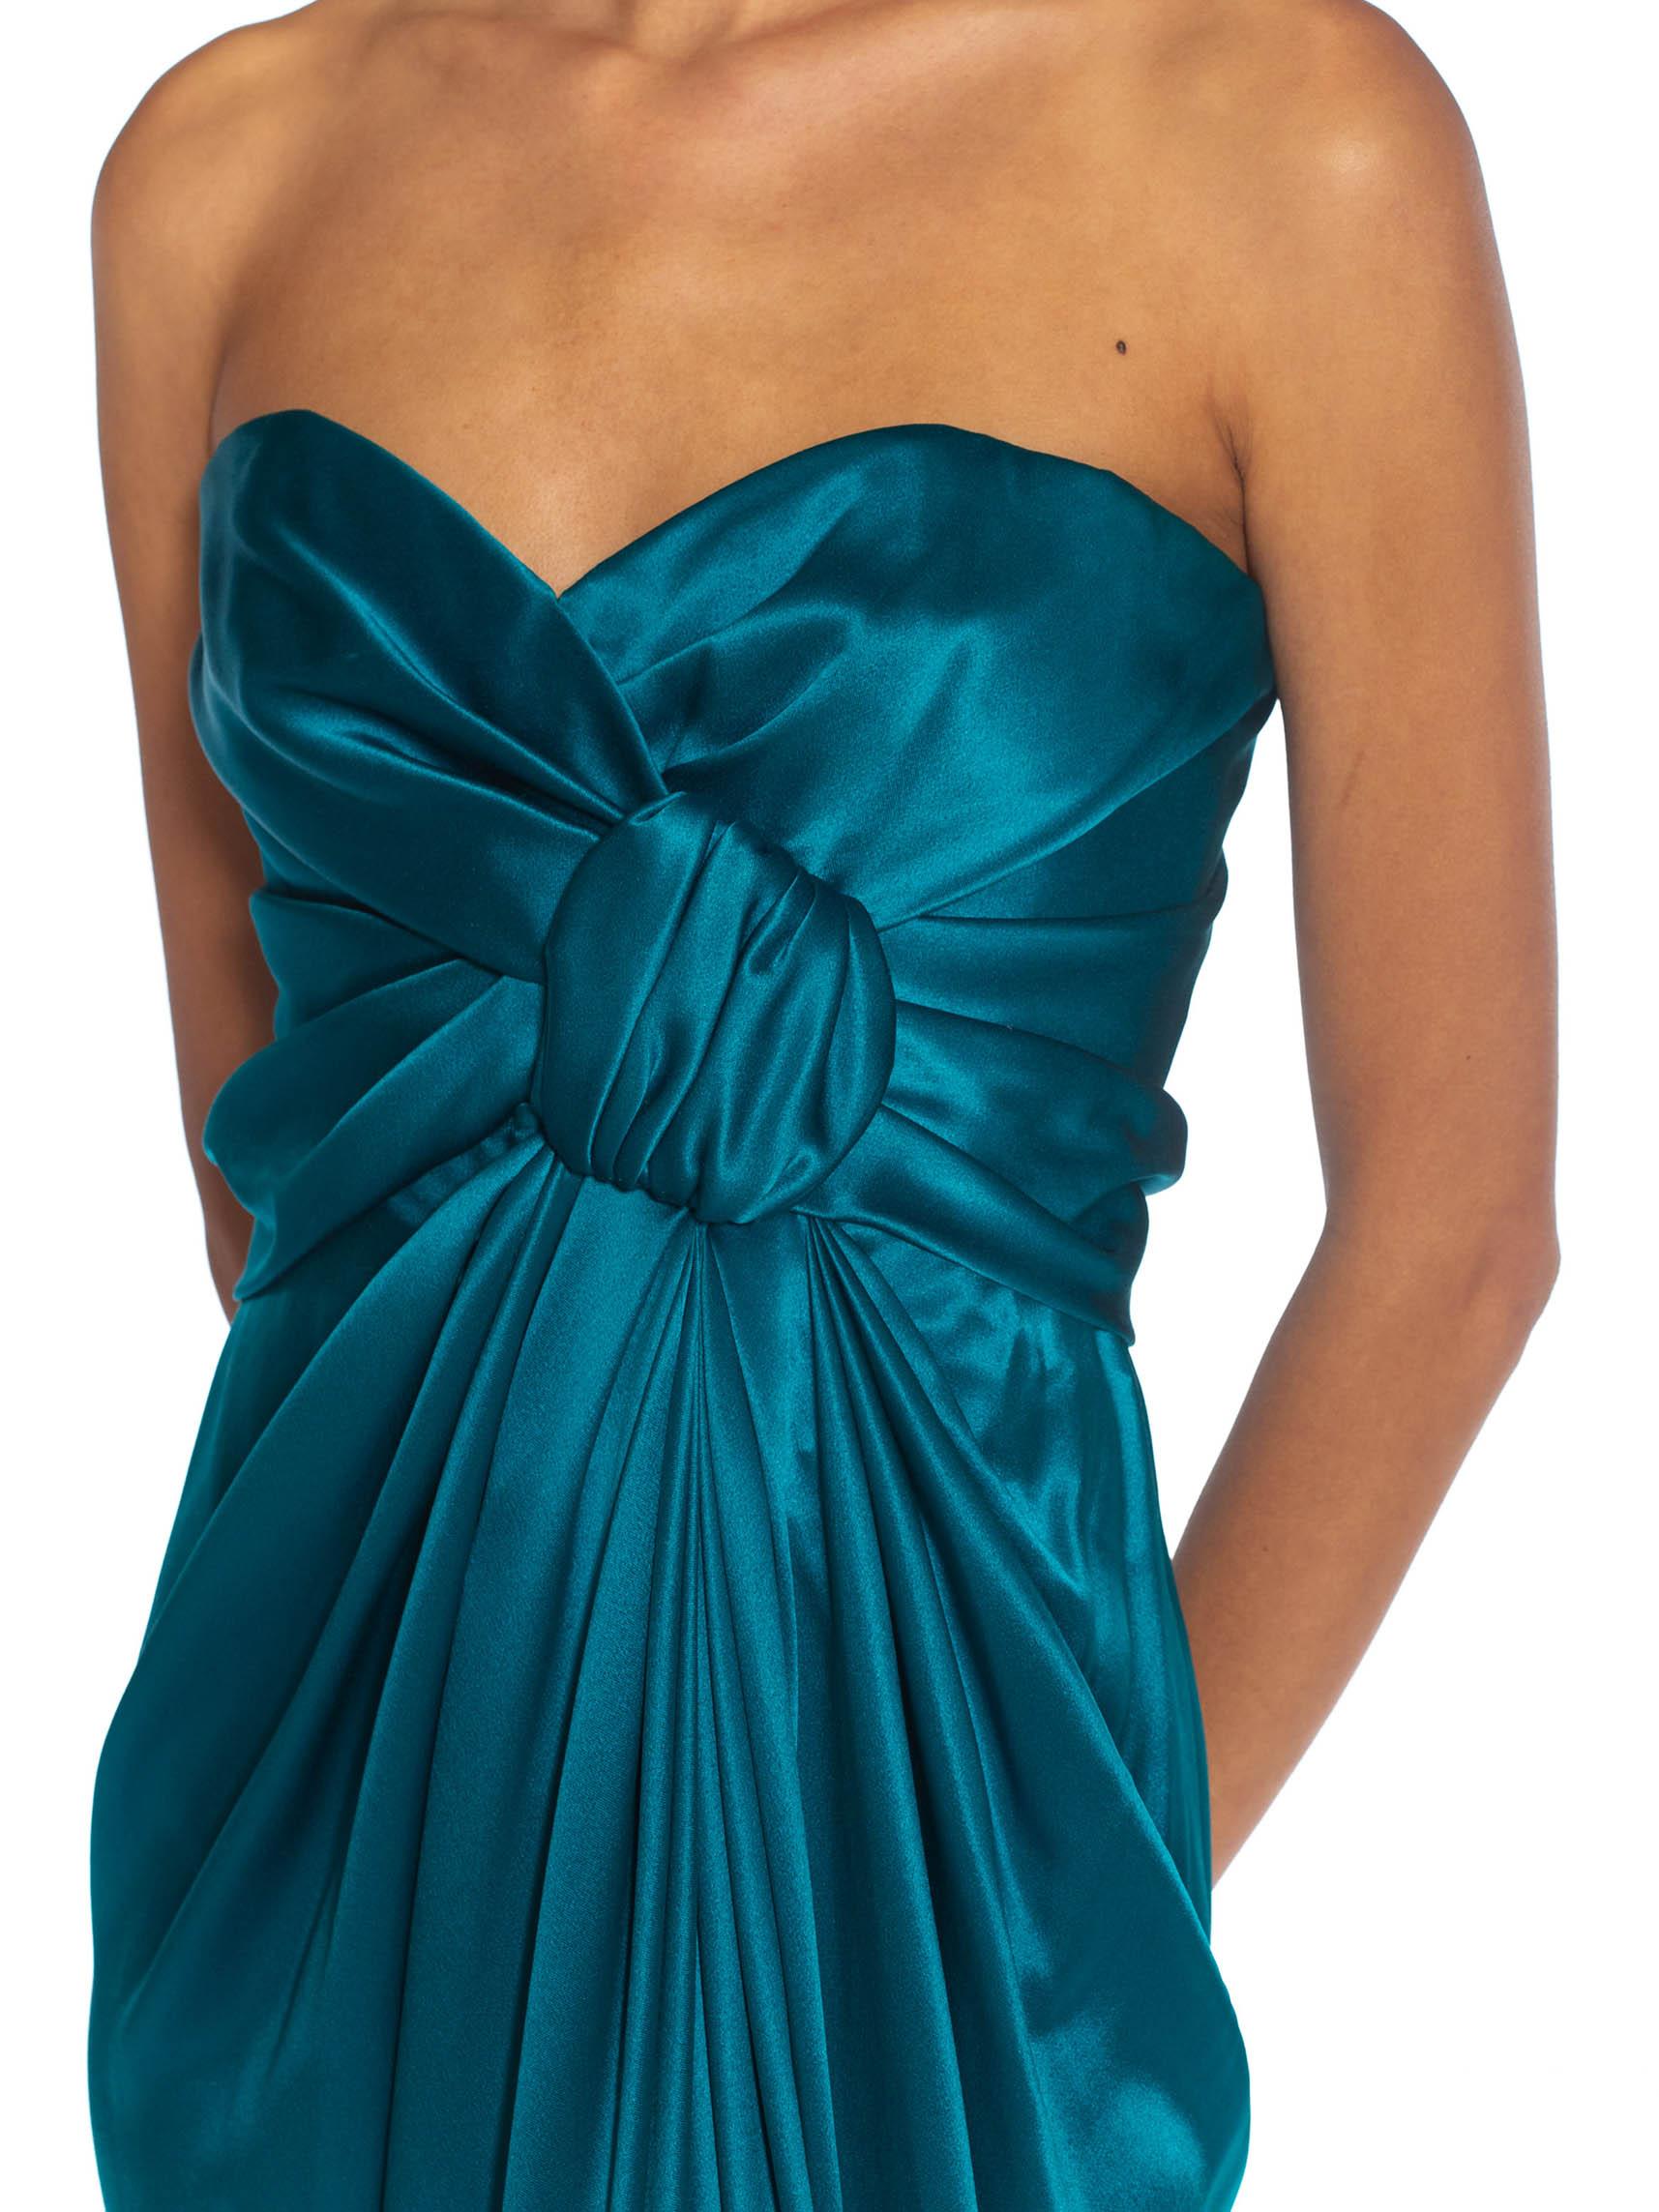 Women's 1980S YVES SAINT LAURENT Teal Haute Couture Silk Satin Draped Strpless Gown For Sale